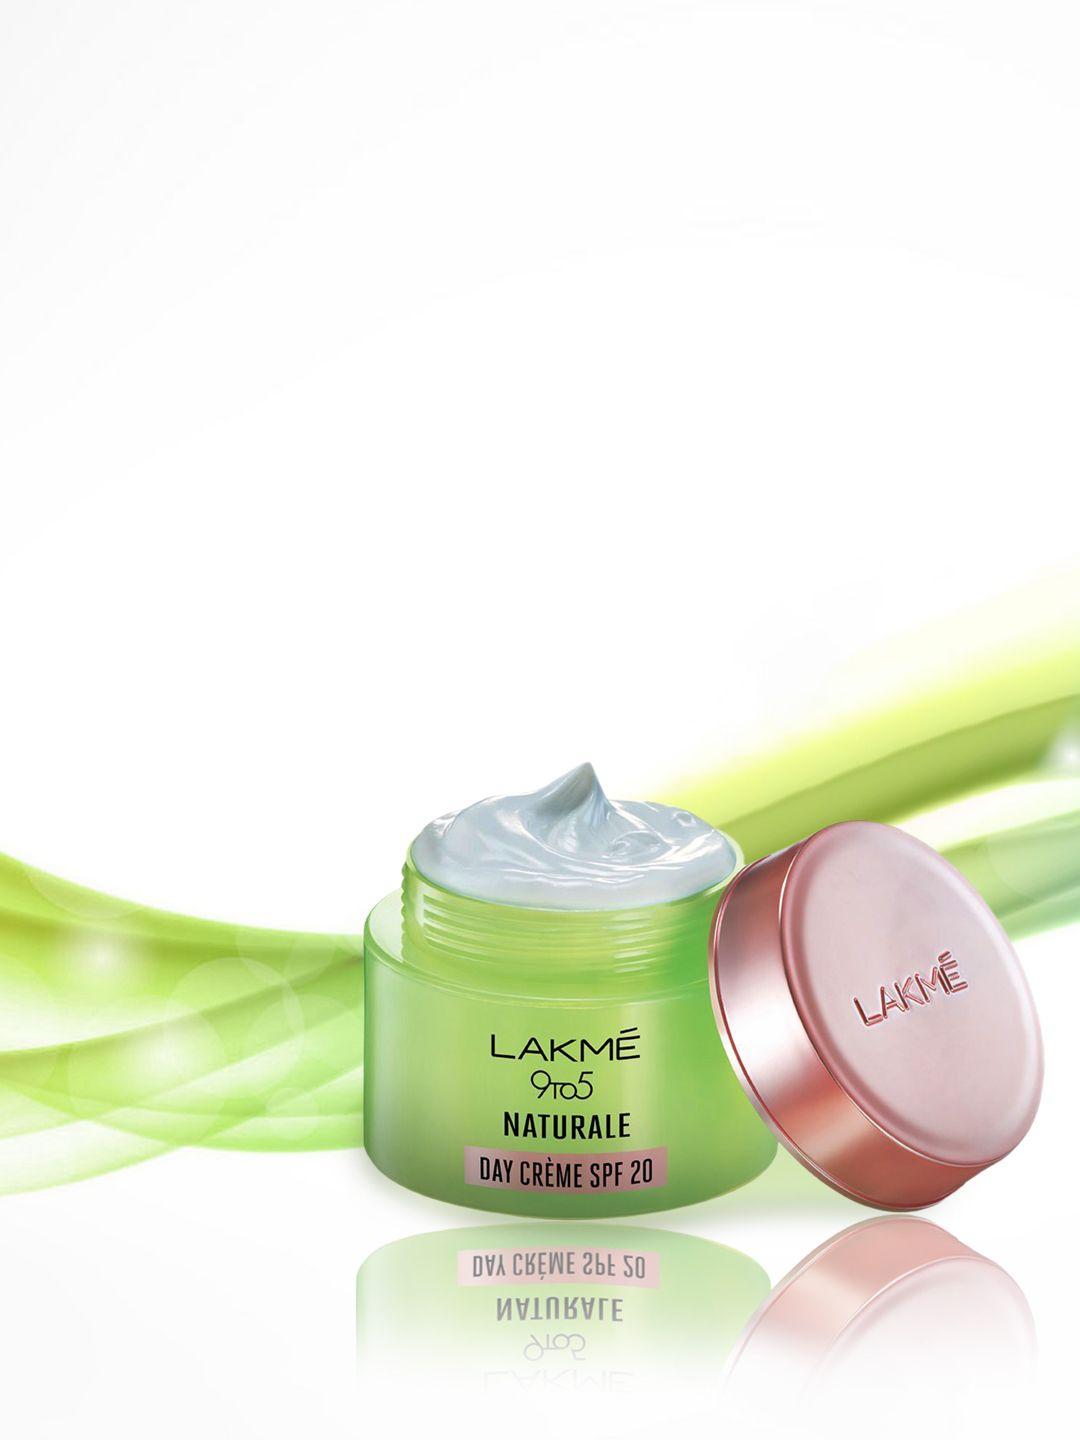 lakme 9 to 5 naturale day creme with spf 20 50g